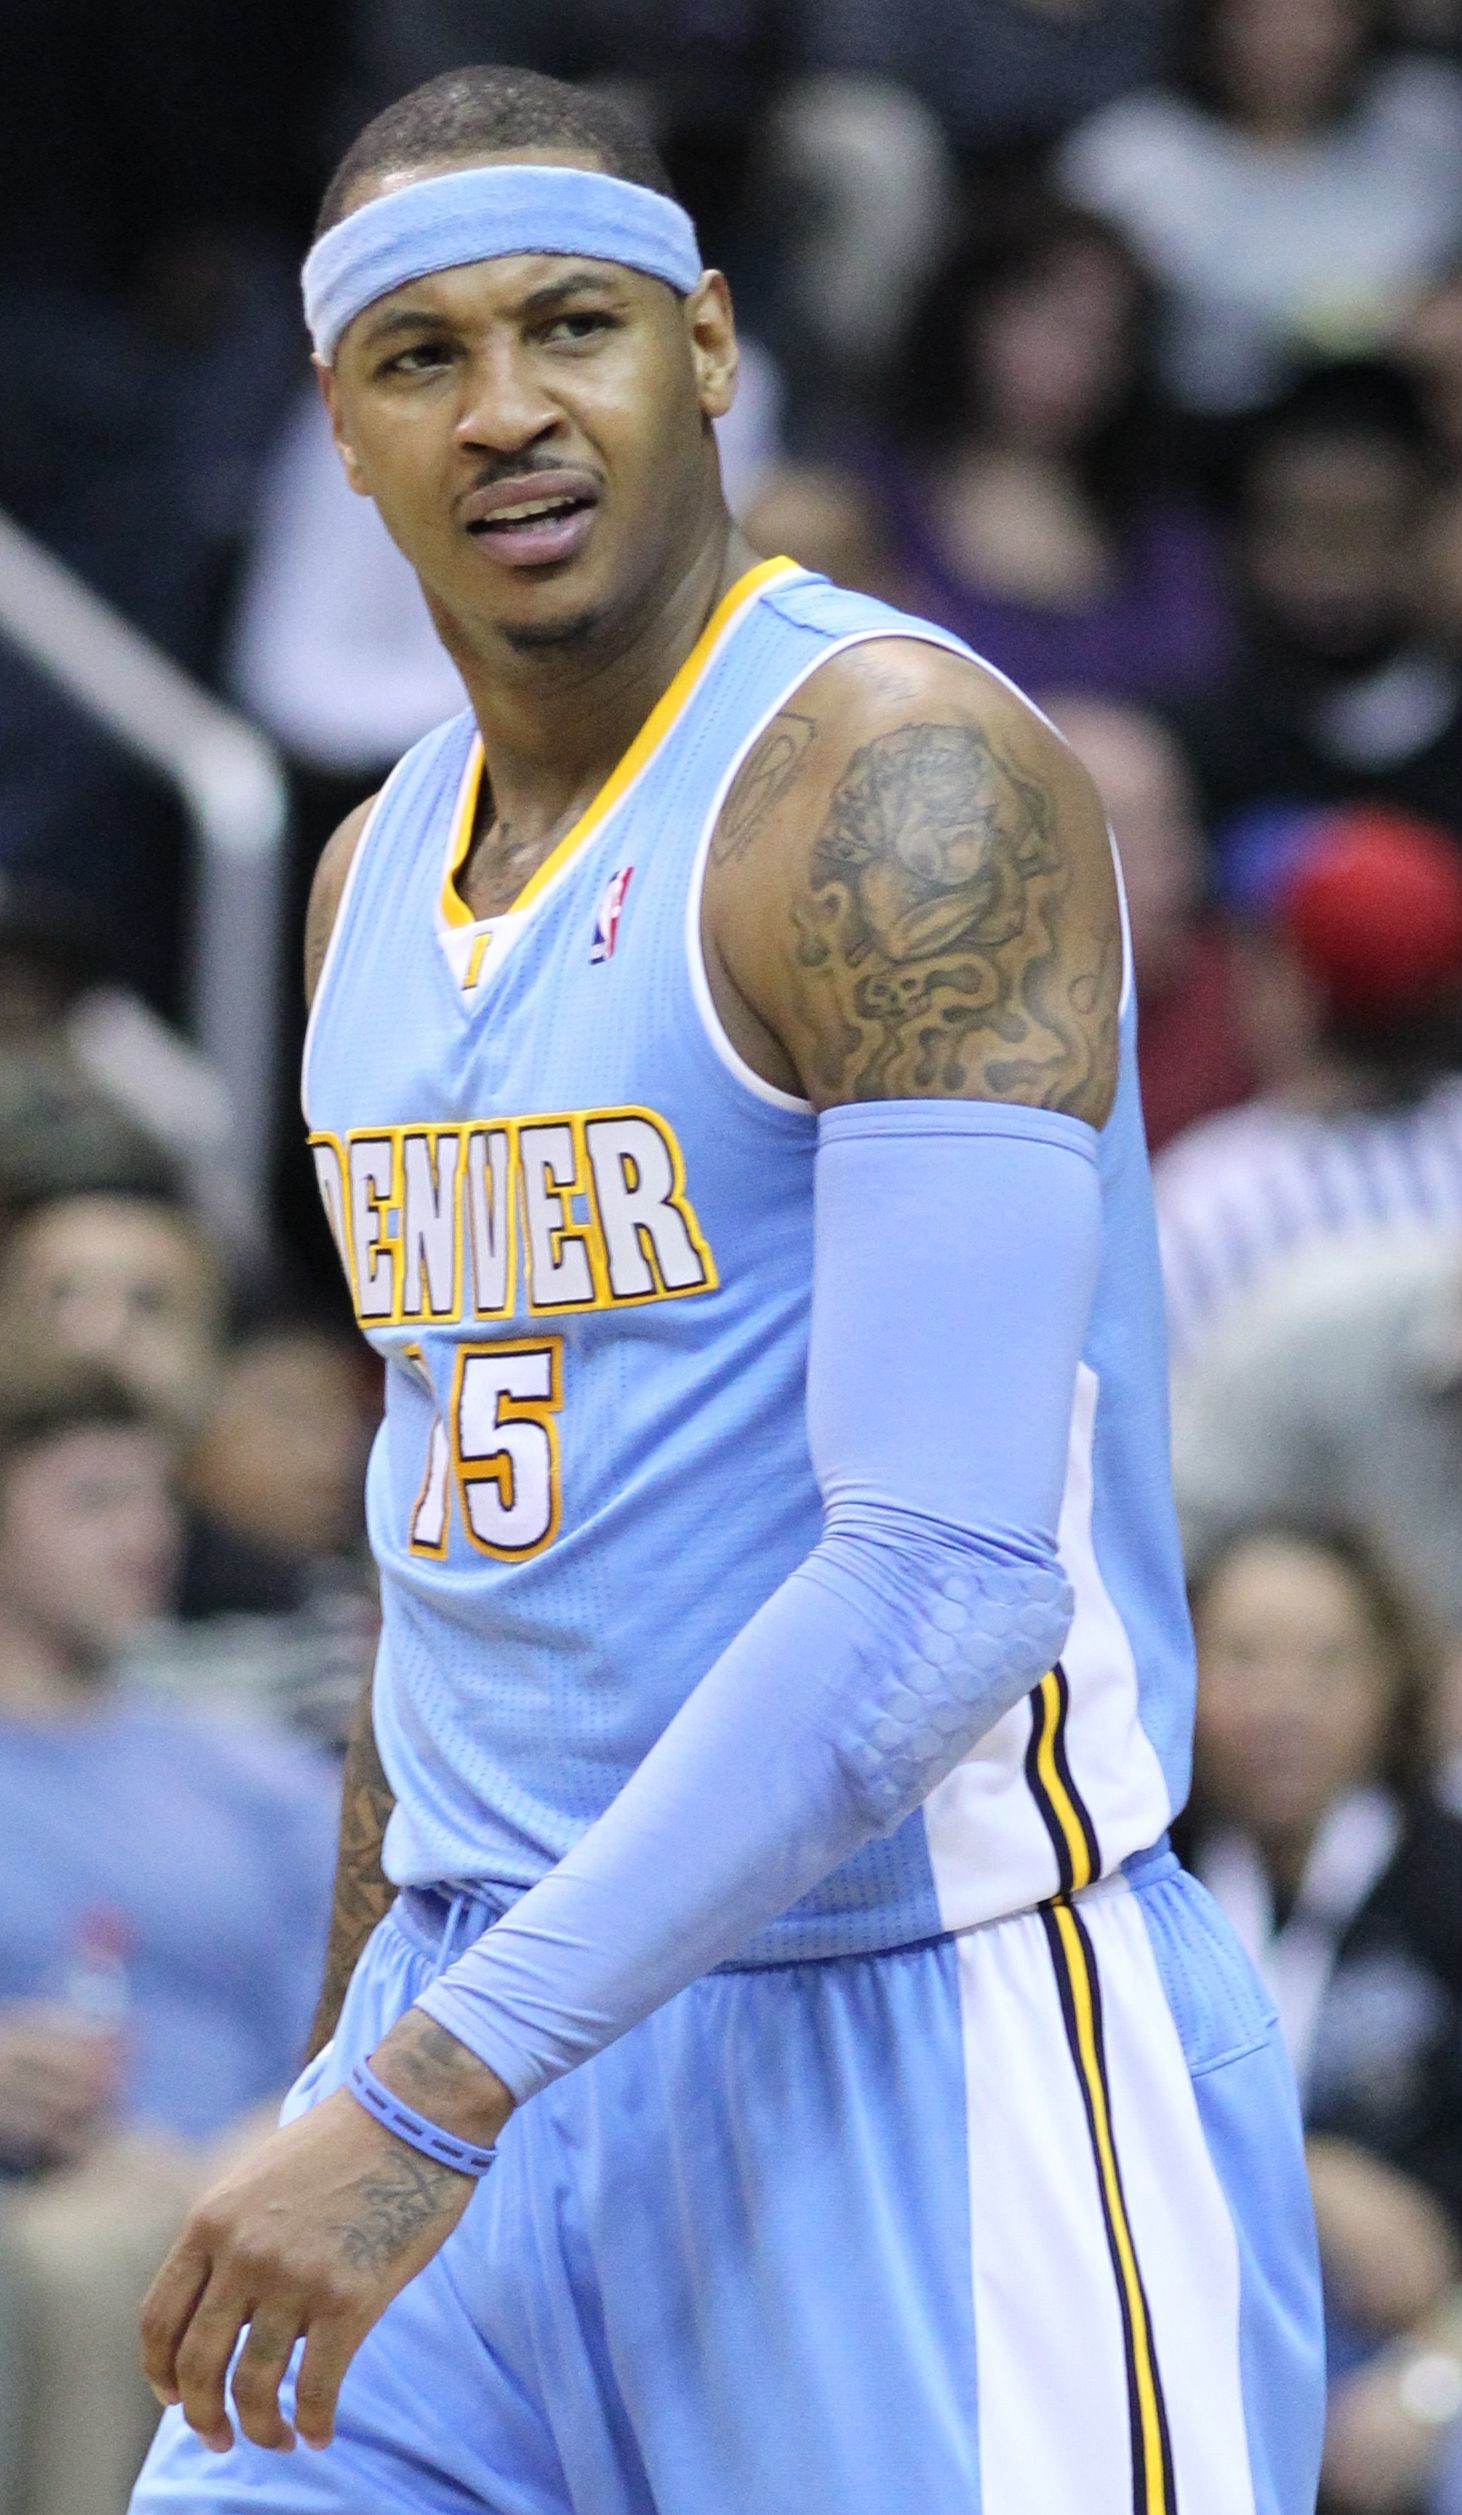 1462x2515 Carmelo Anthony Nuggets, Carmelo Anthony Wallpaper, Pro Basketball,  Basketball Players, Nba Stars